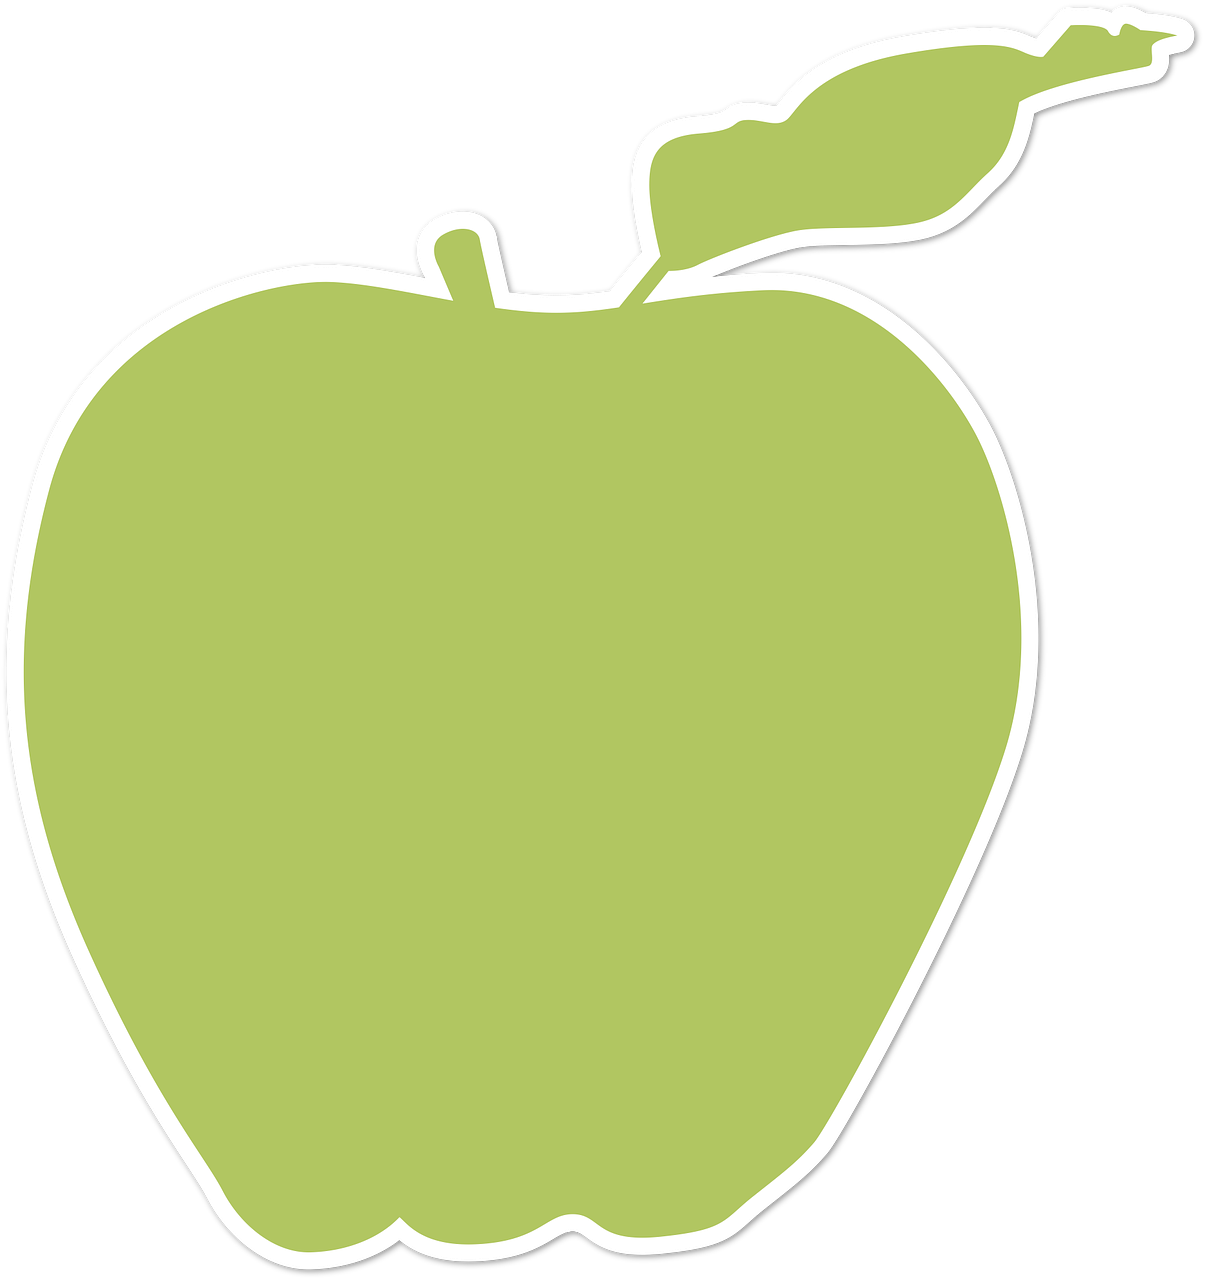 Apple Scalable Network Vector Graphics Portable PNG Image